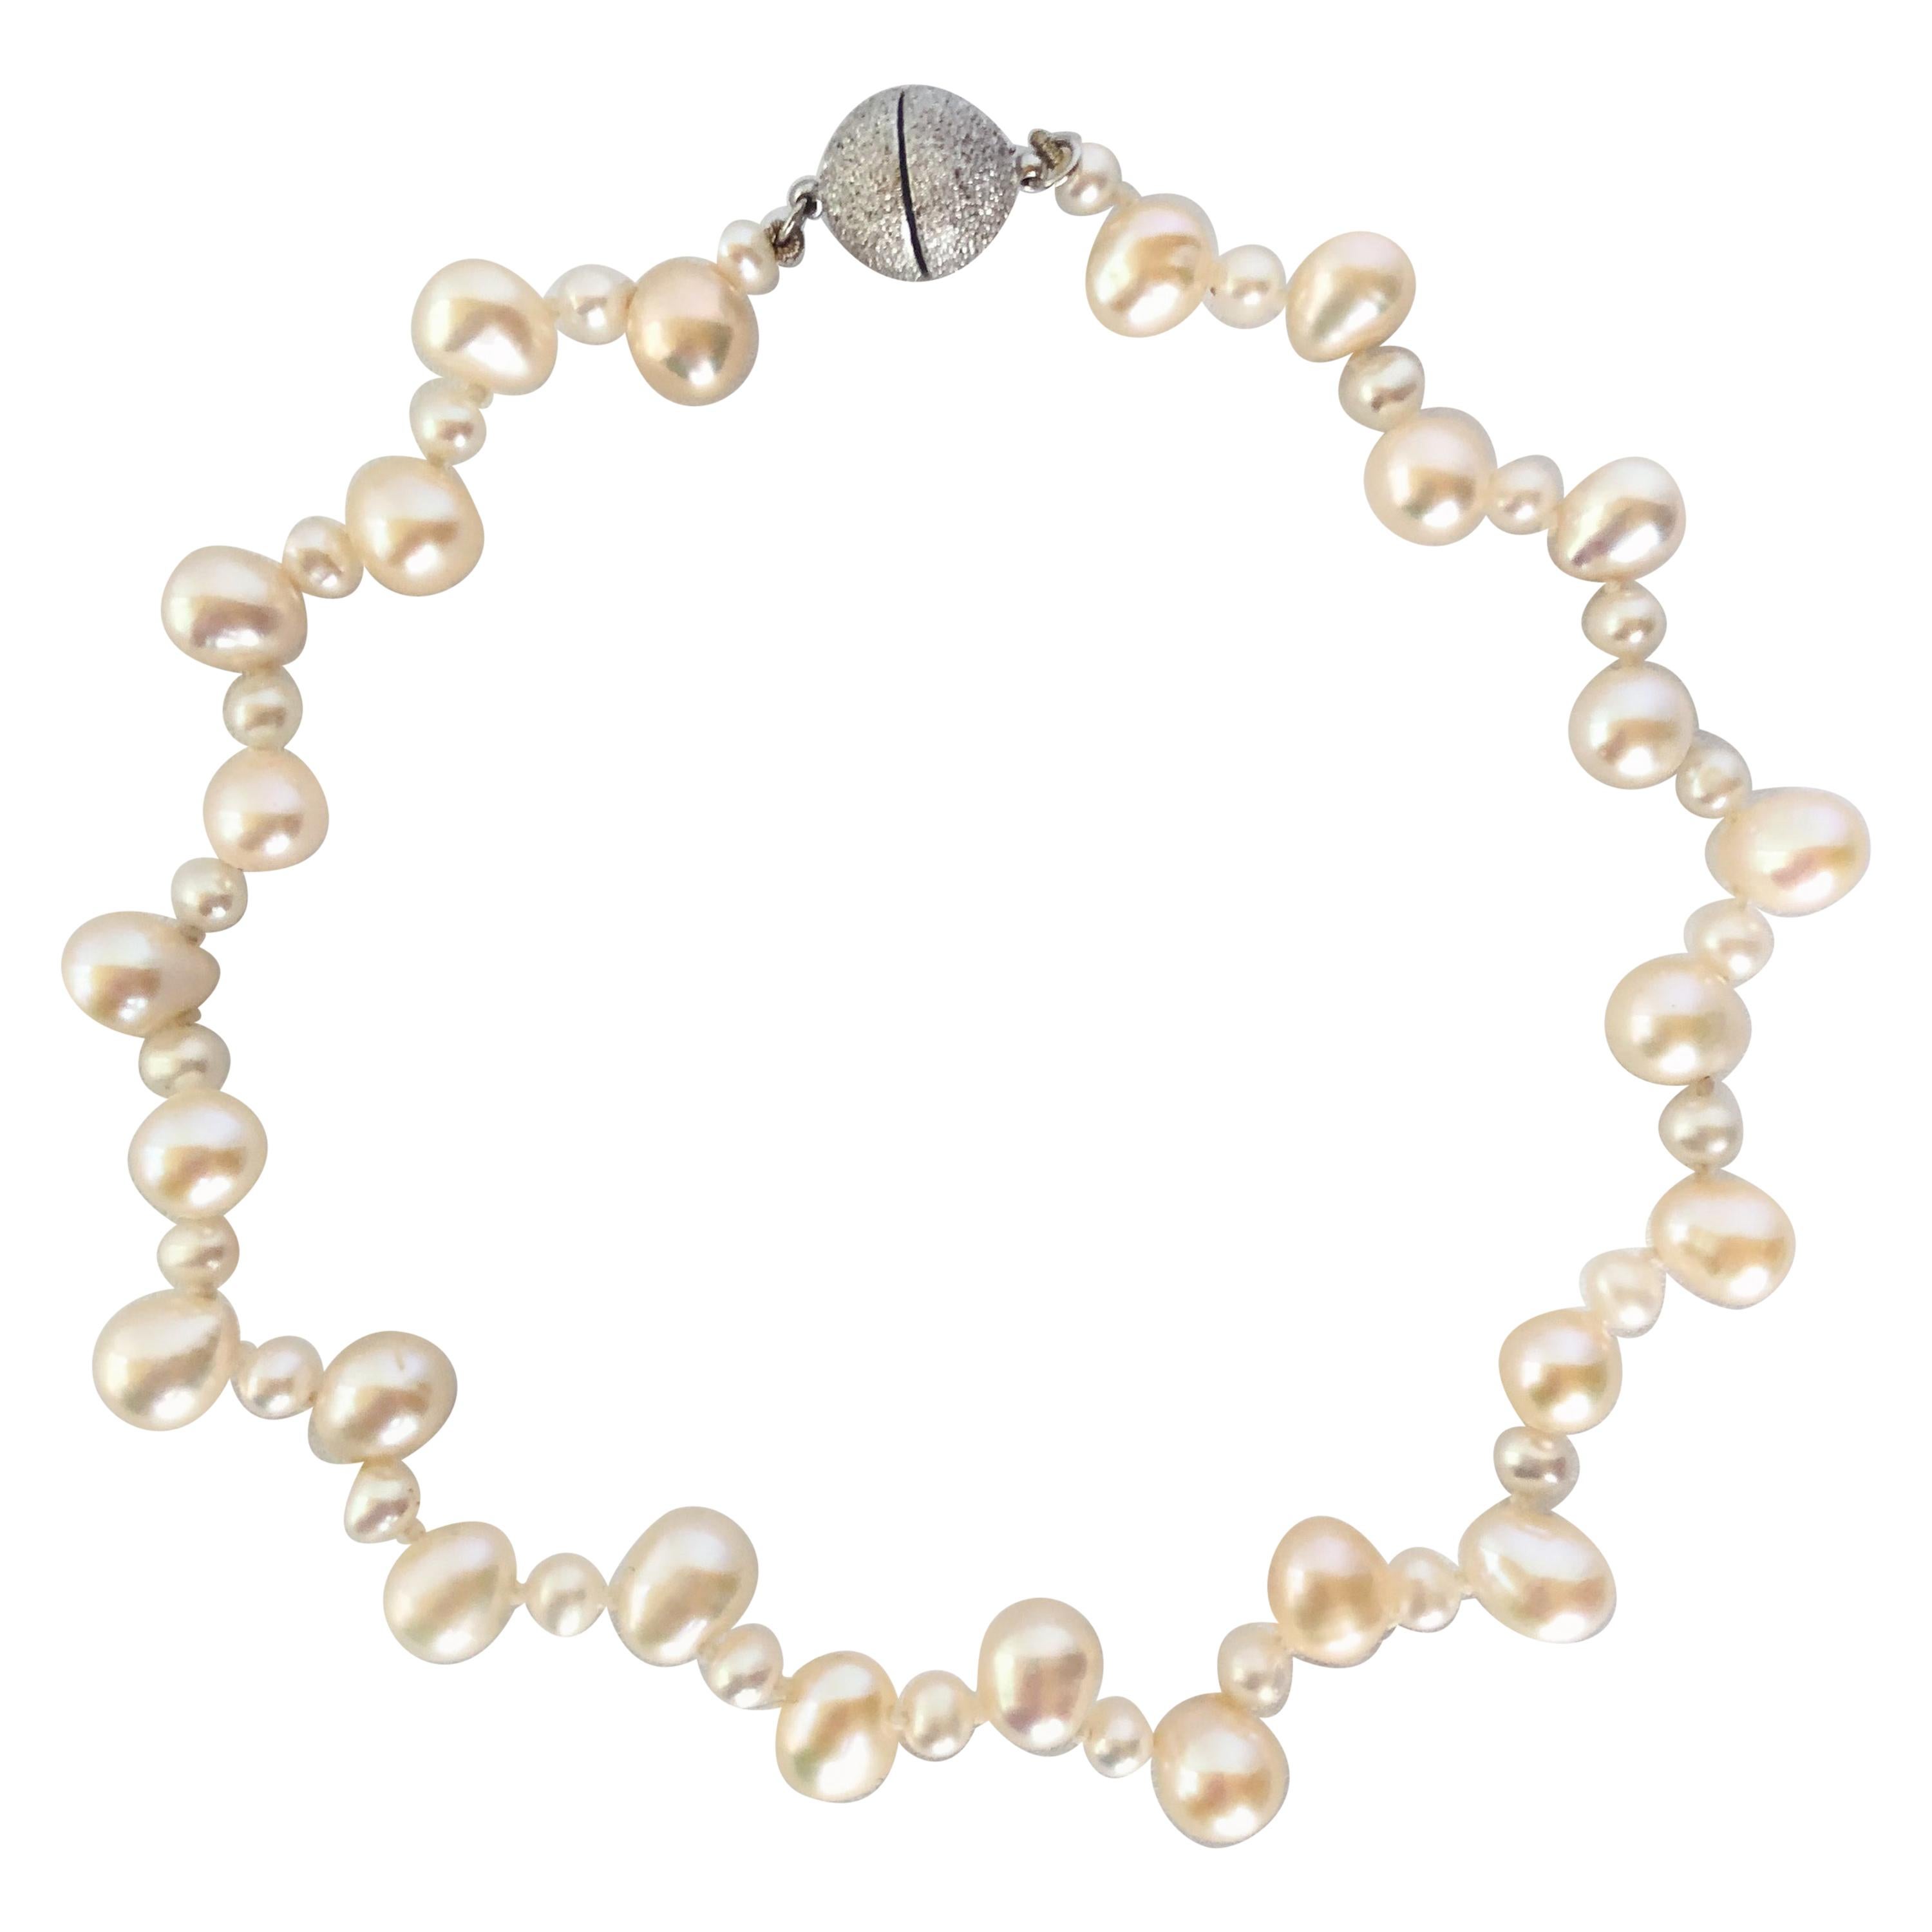 Marina J. Real Pearl Pet Necklace/Collar with Silver Magnetic Ball Clasp